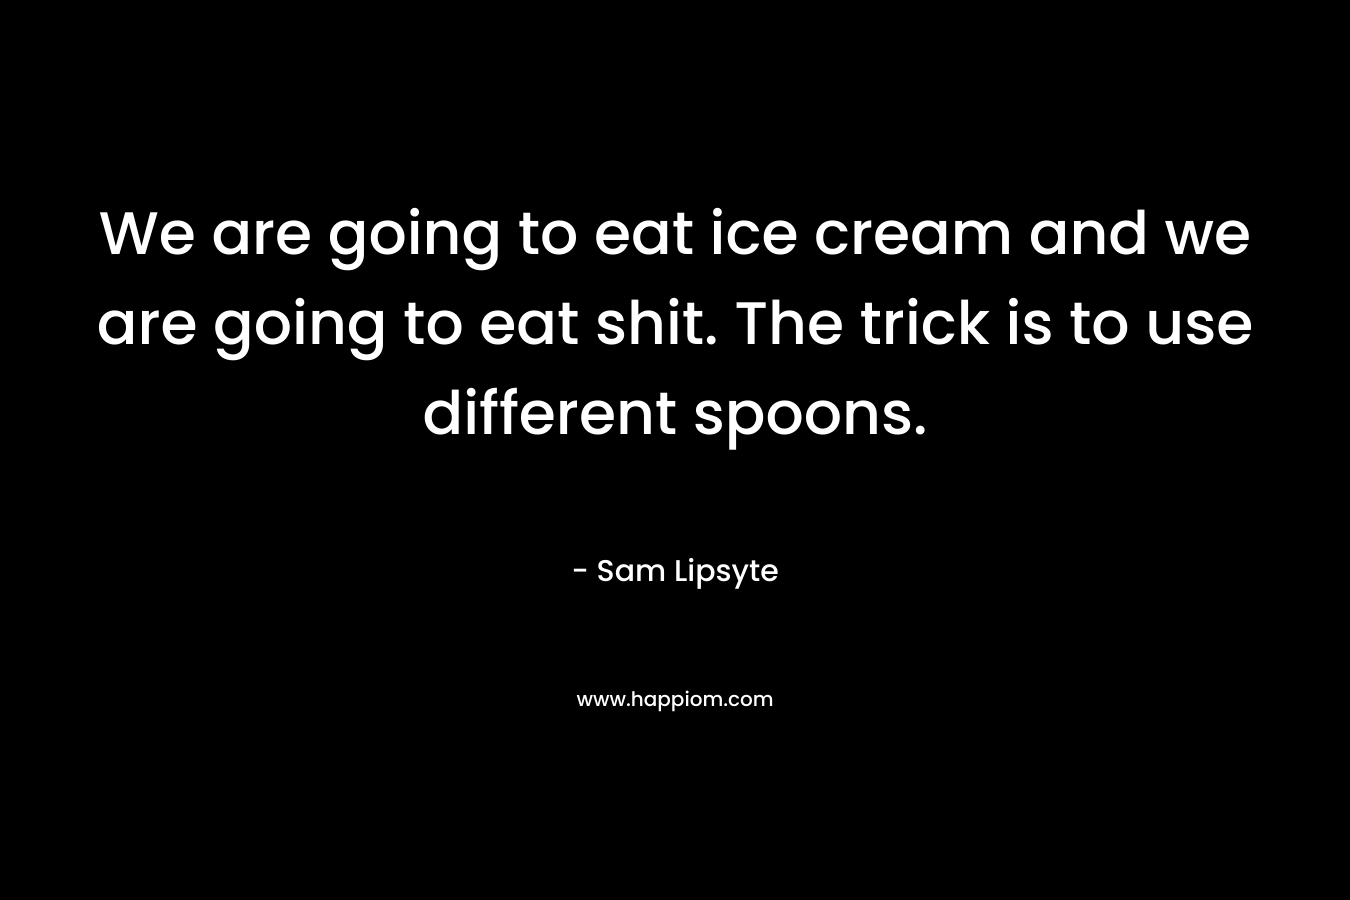 We are going to eat ice cream and we are going to eat shit. The trick is to use different spoons.